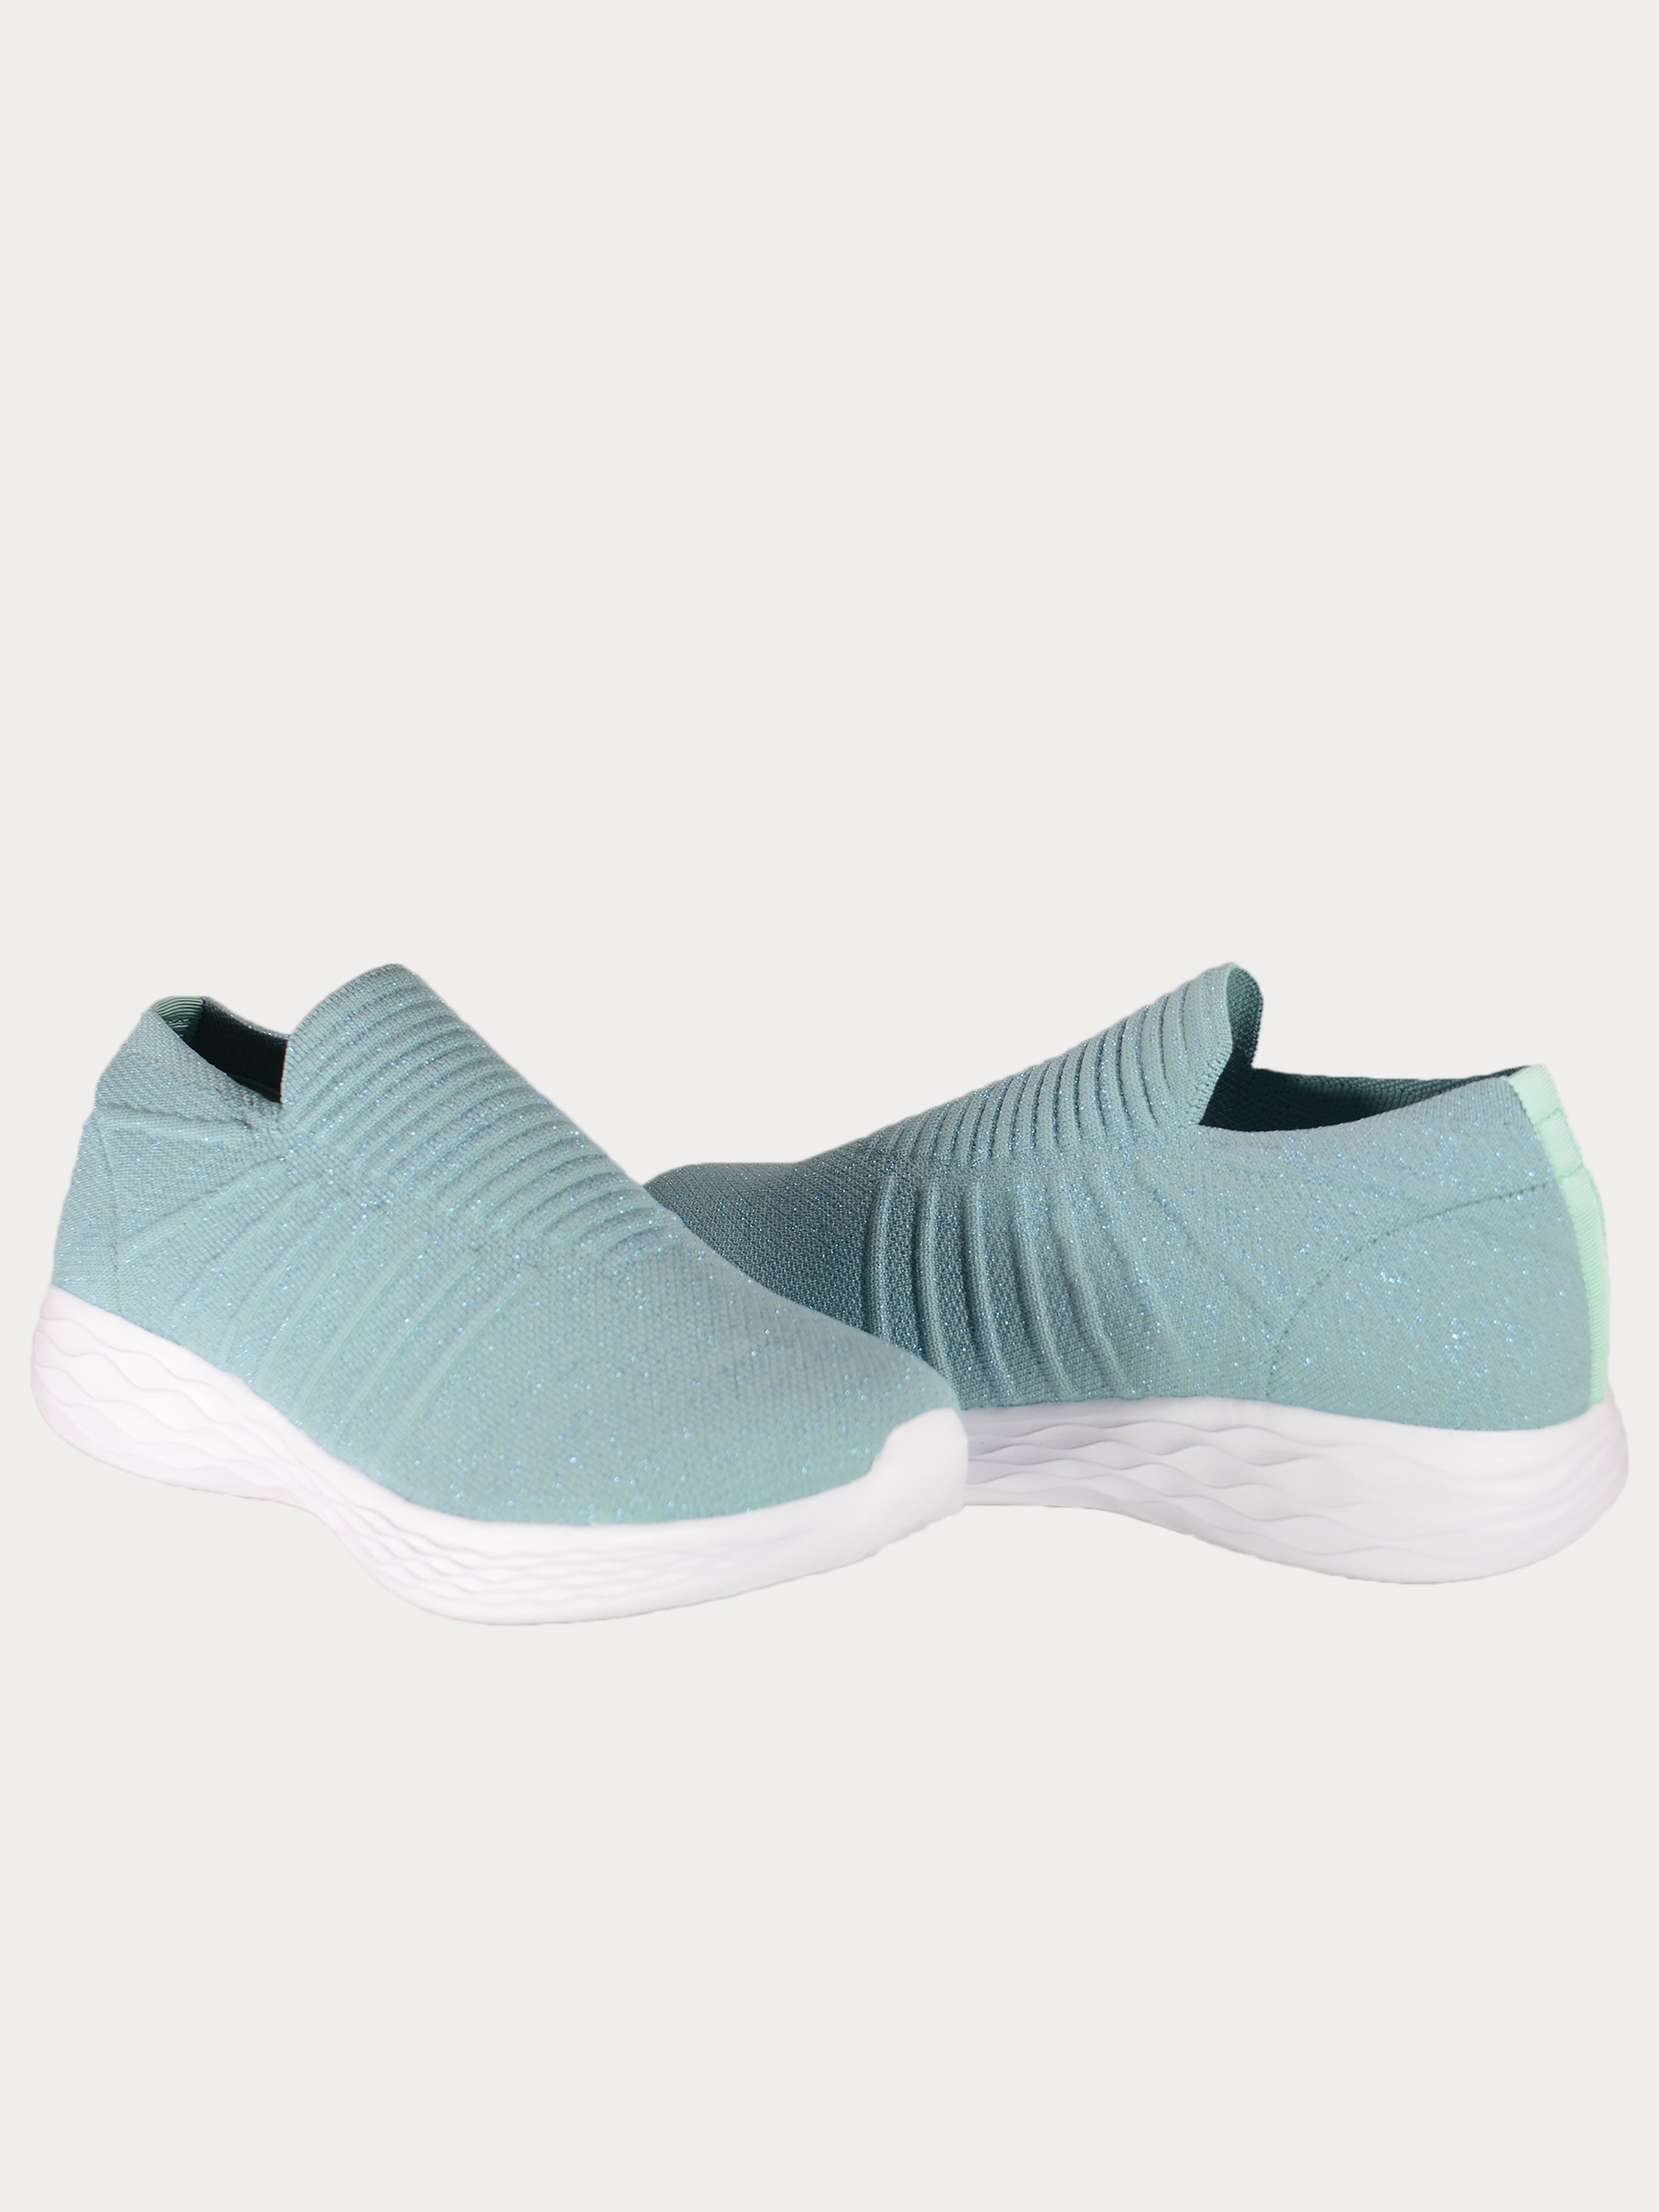 Tracker Women Slip On Trainers #color_Green